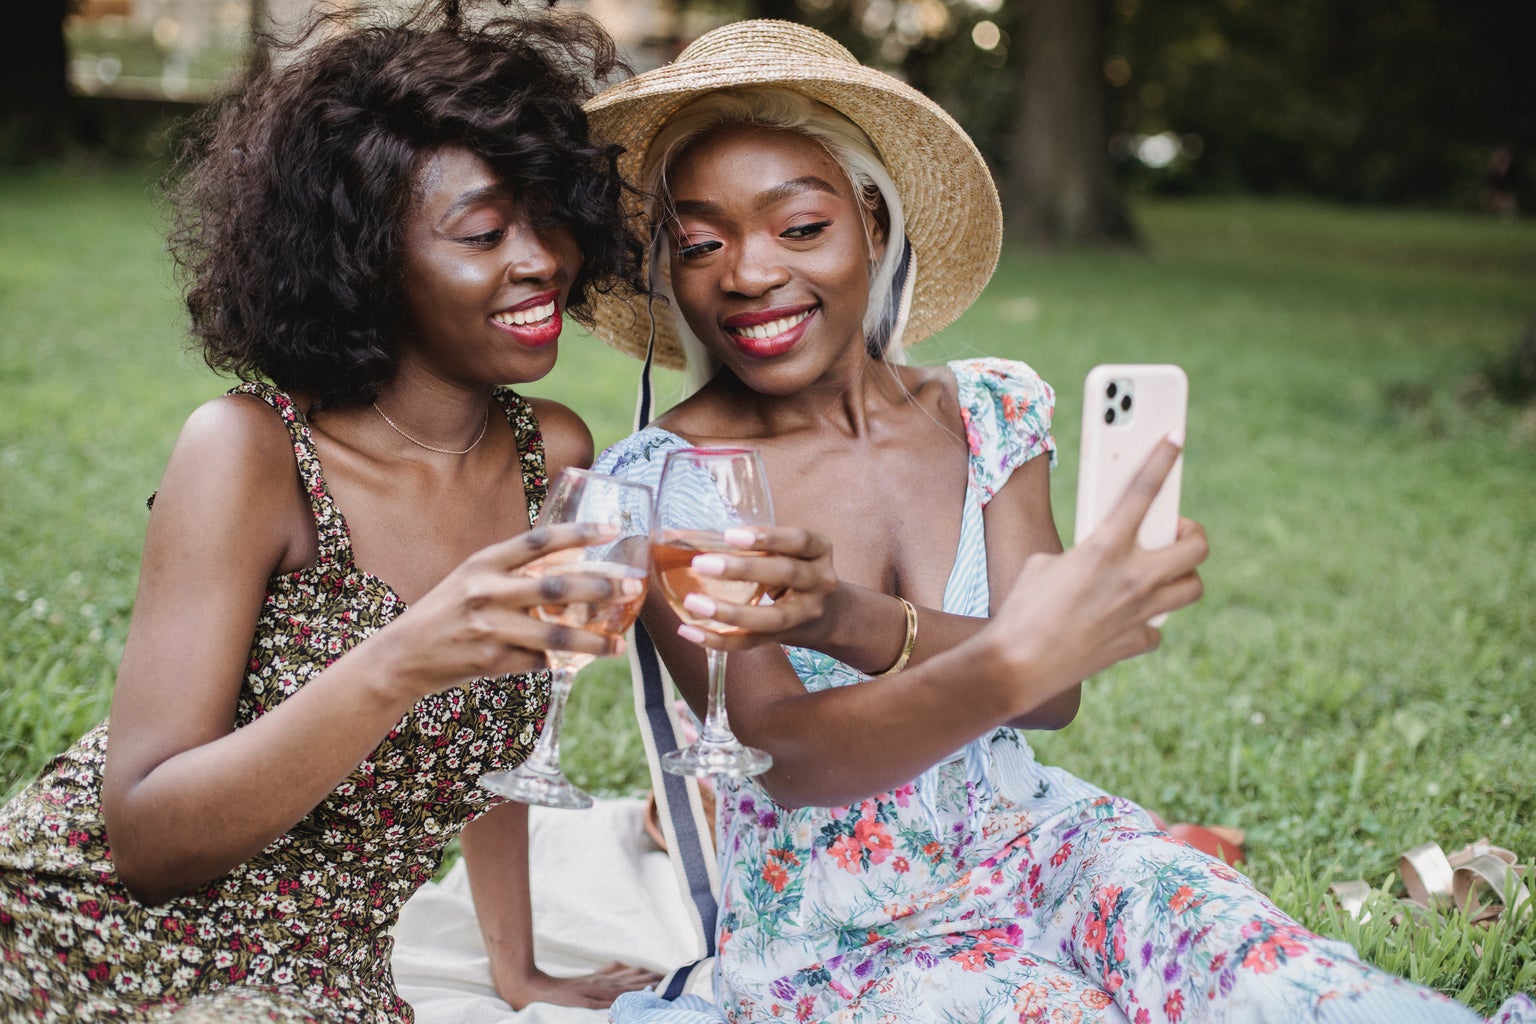 Women taking a selfie together.